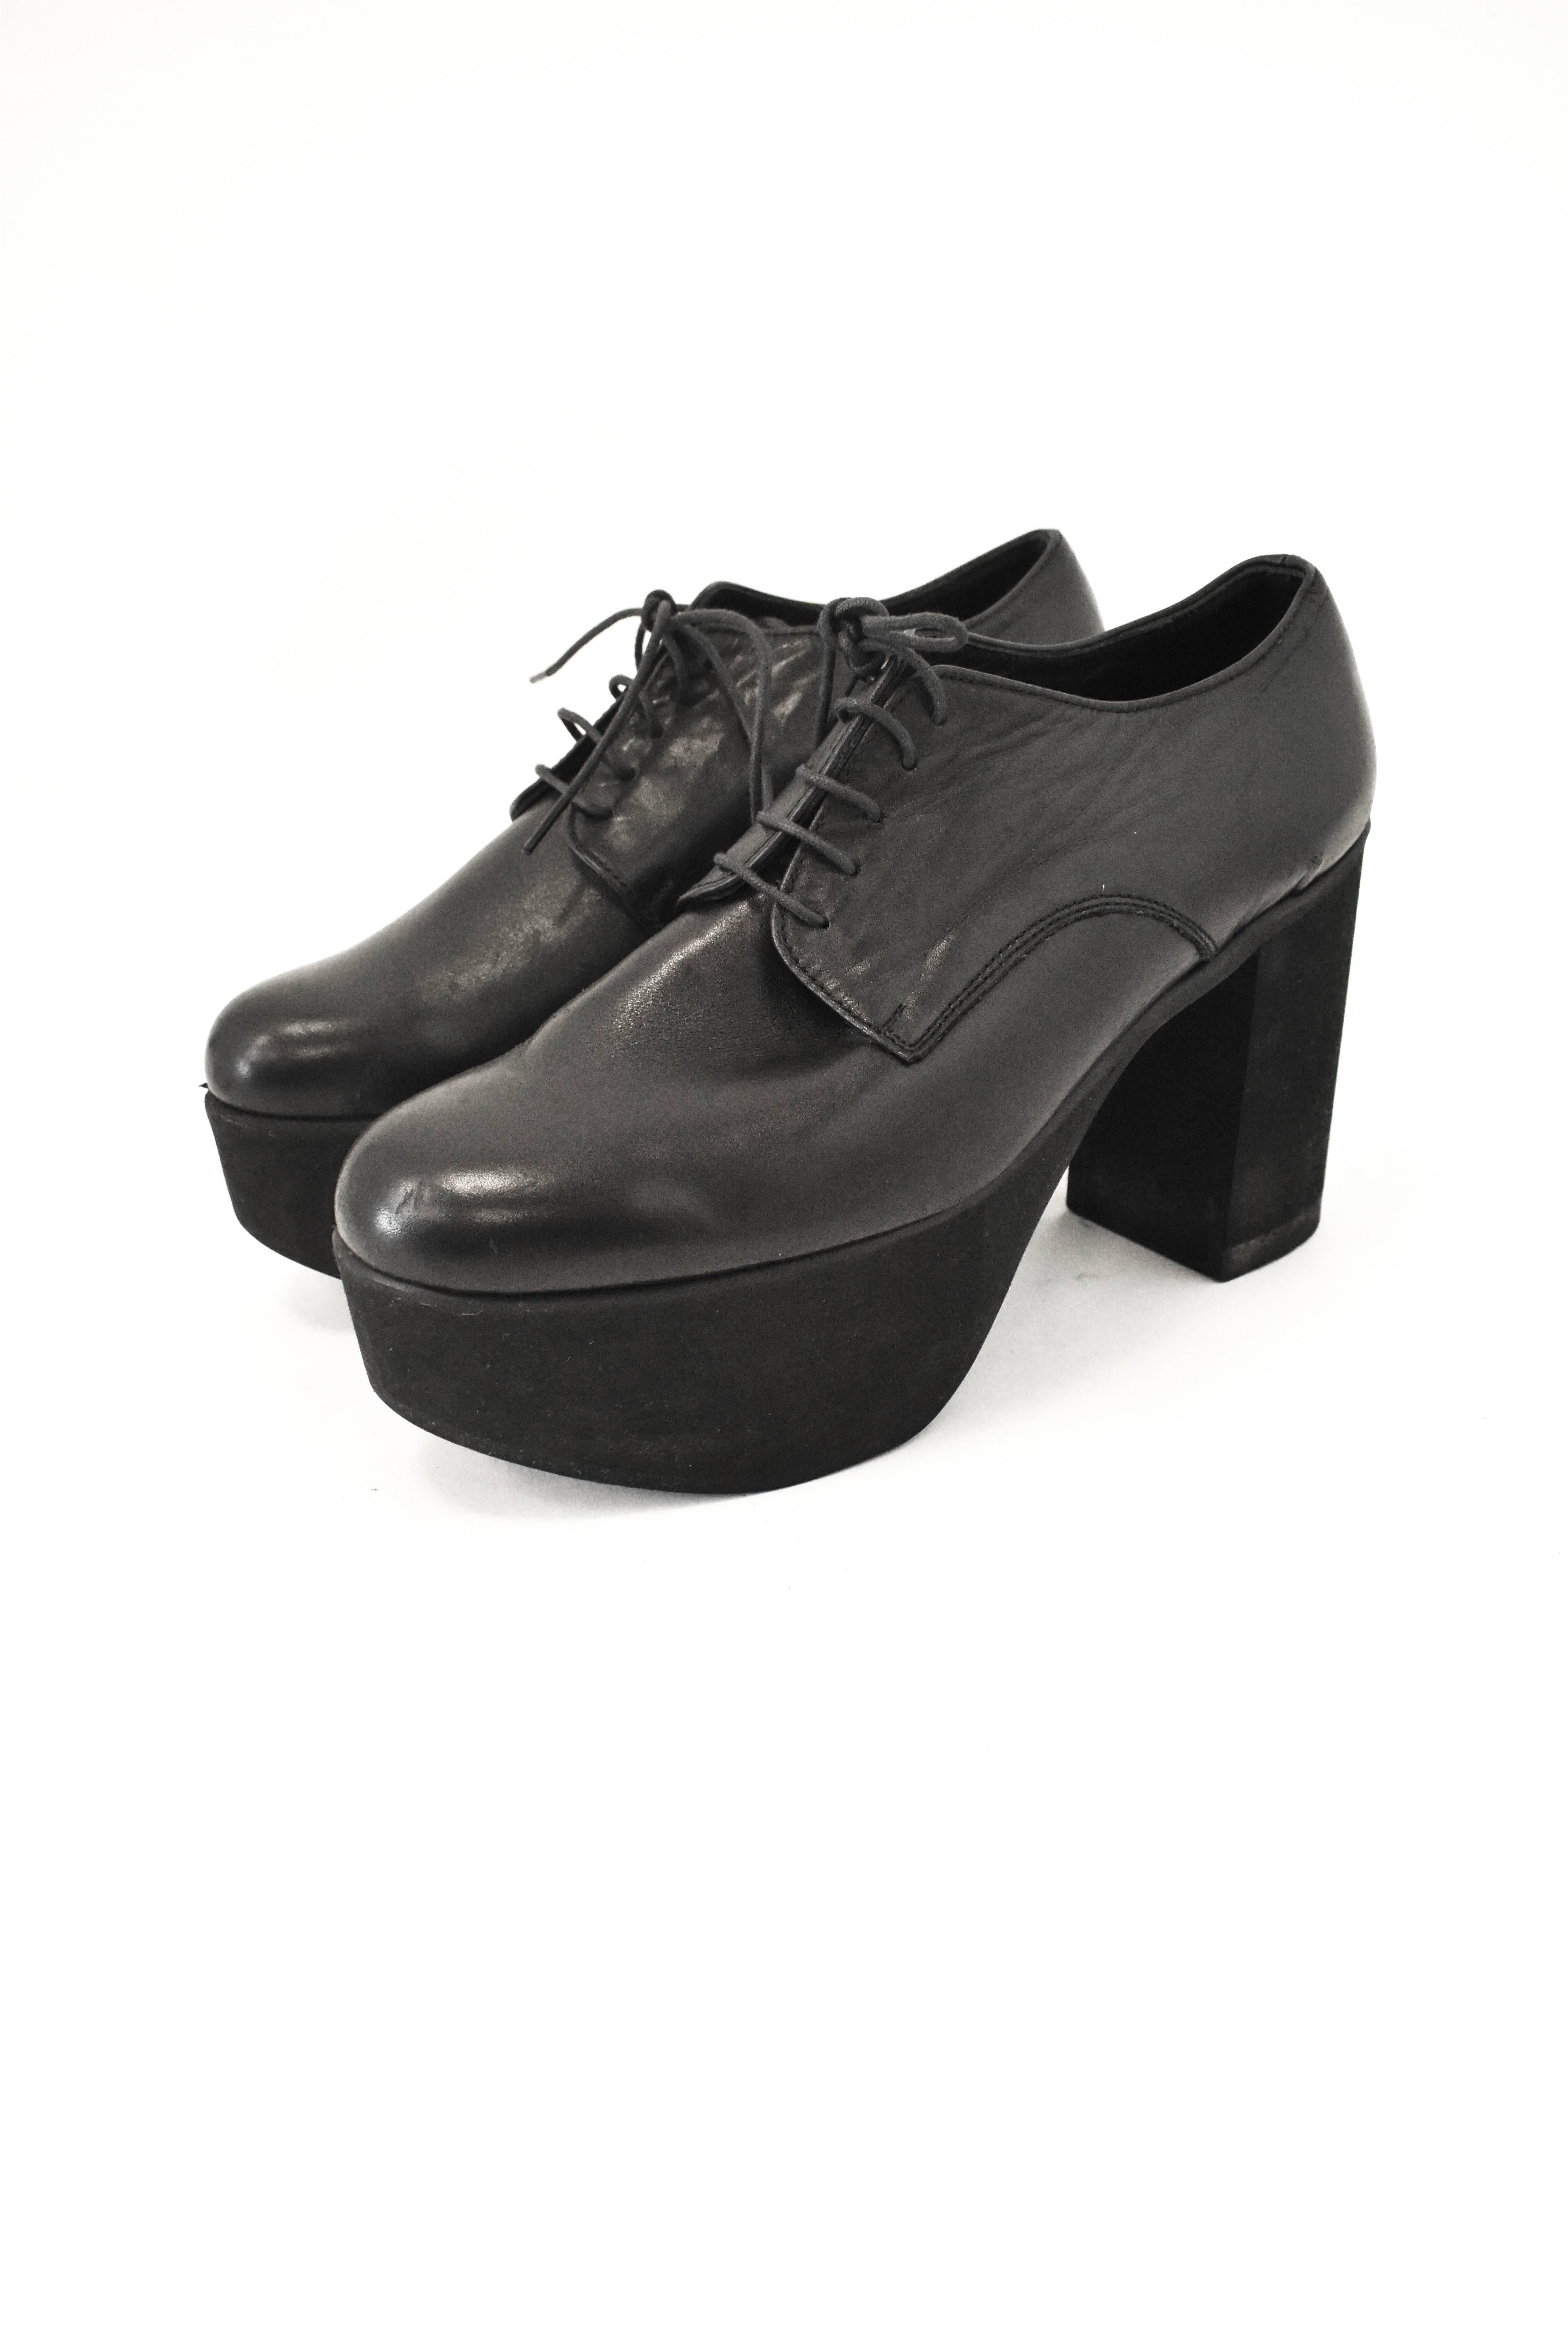 Yohji Yamamoto Black Platform Lace-Up Shoes In Good Condition In London, GB